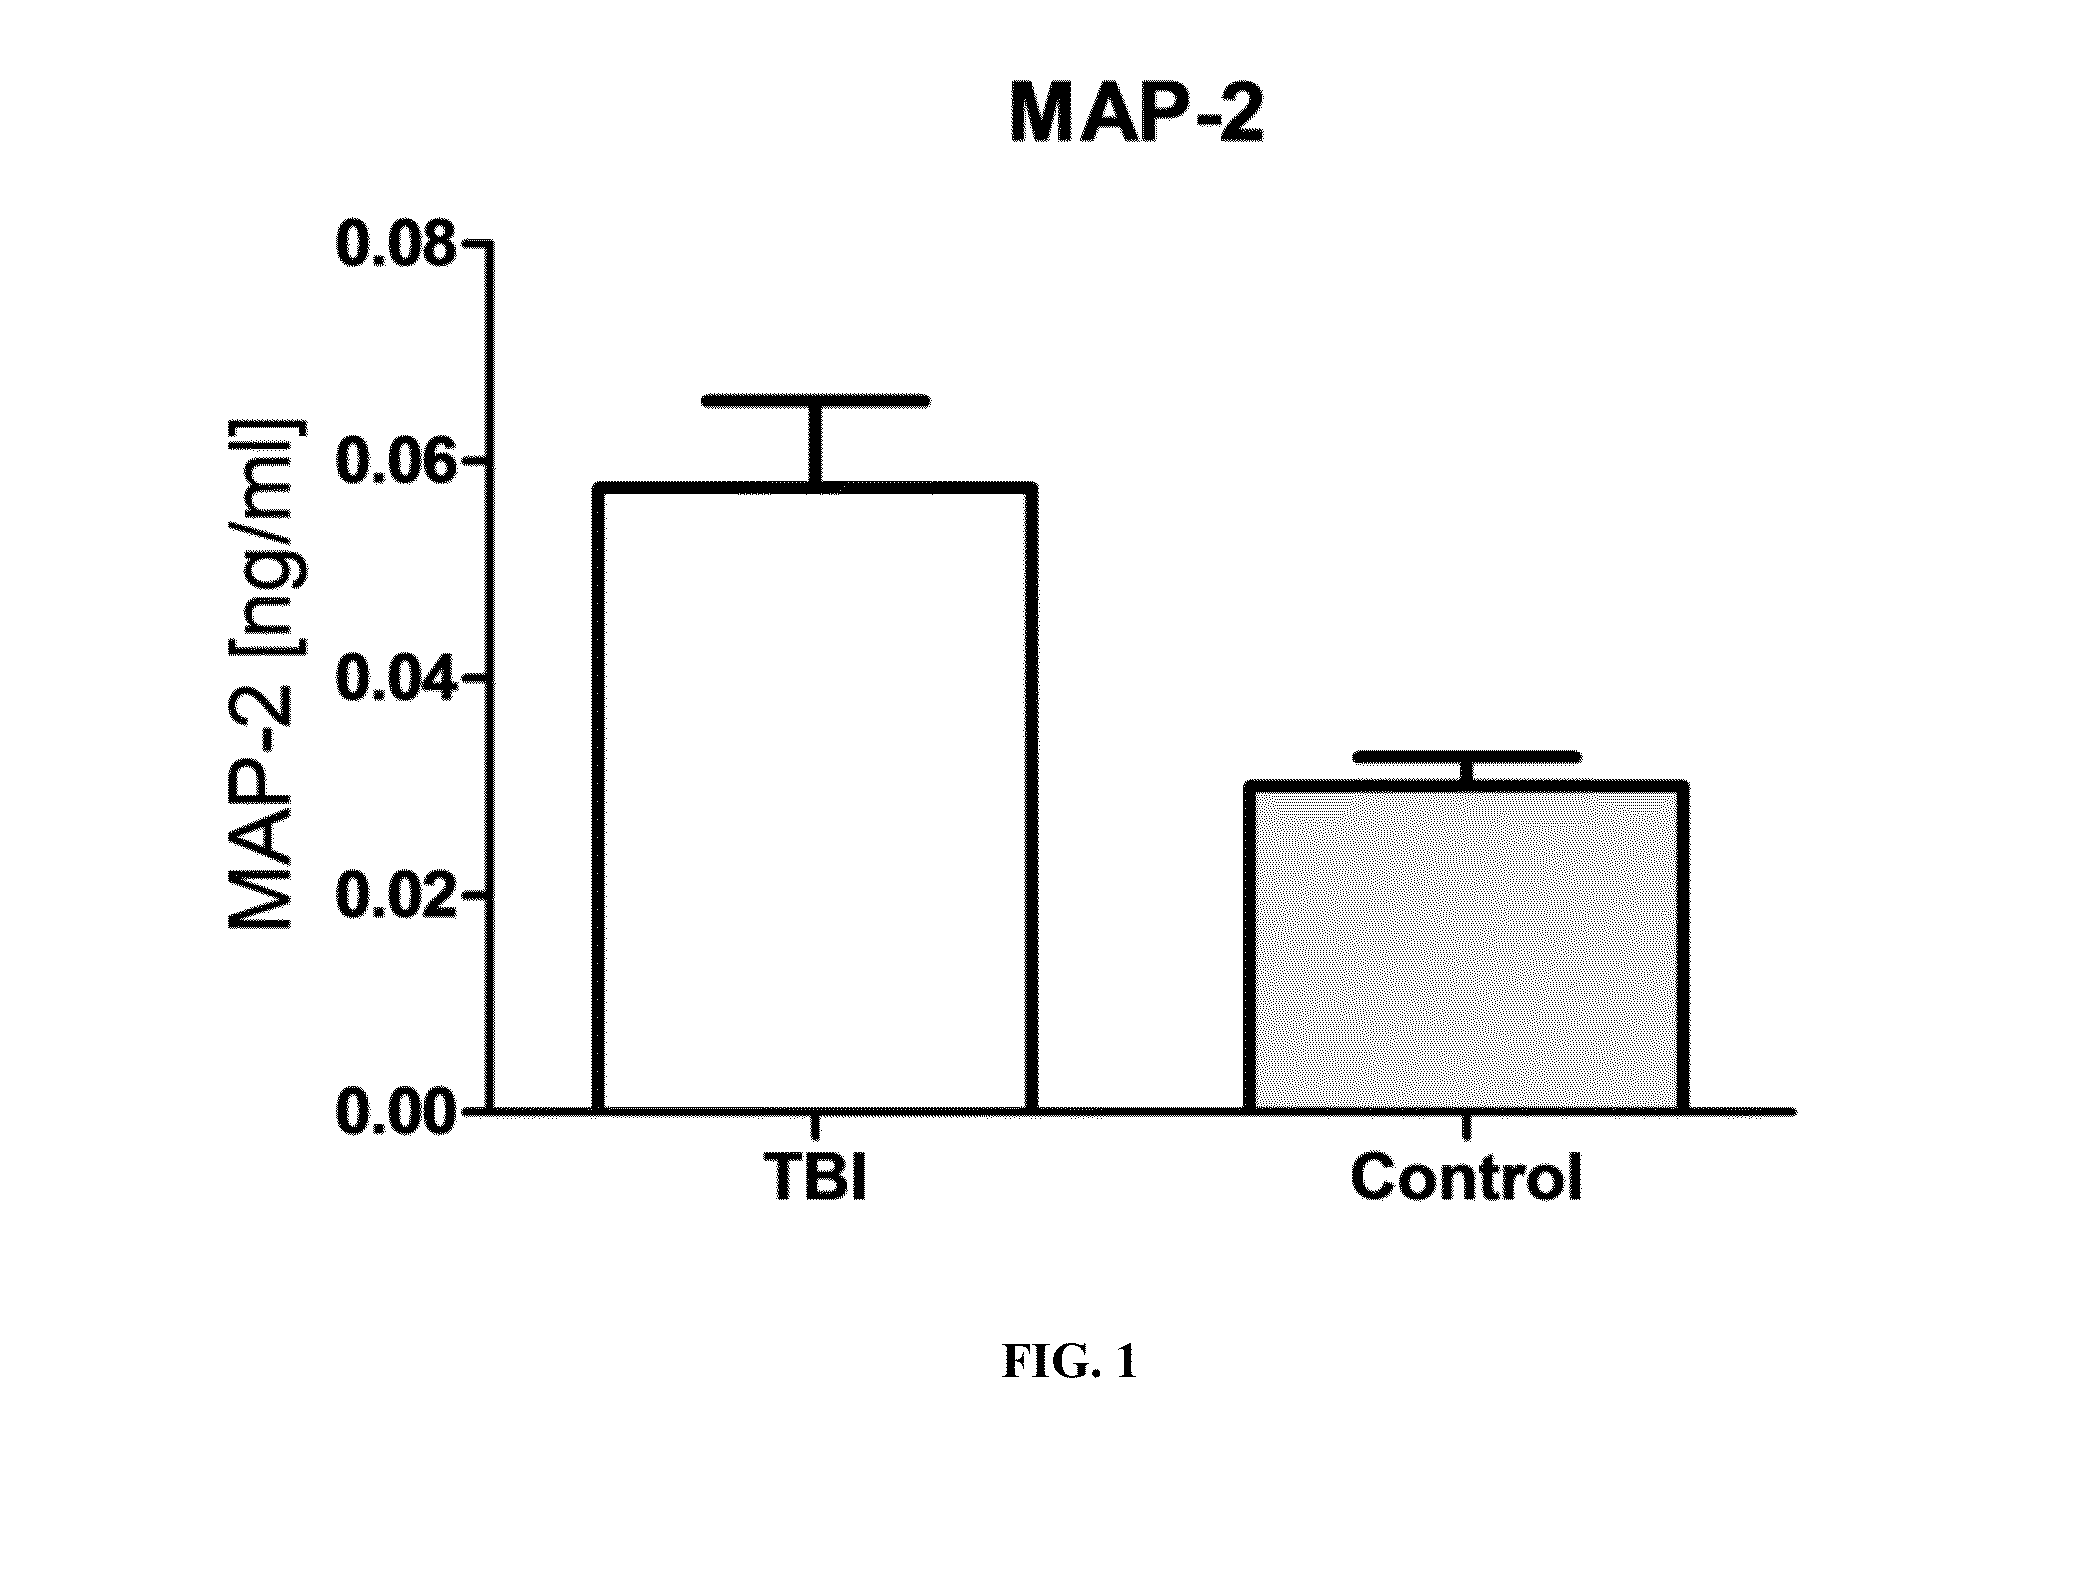 Method and device to detect, monitor and promote neural regeneration and improvement of cognitive function in a subject suffering from neural injury